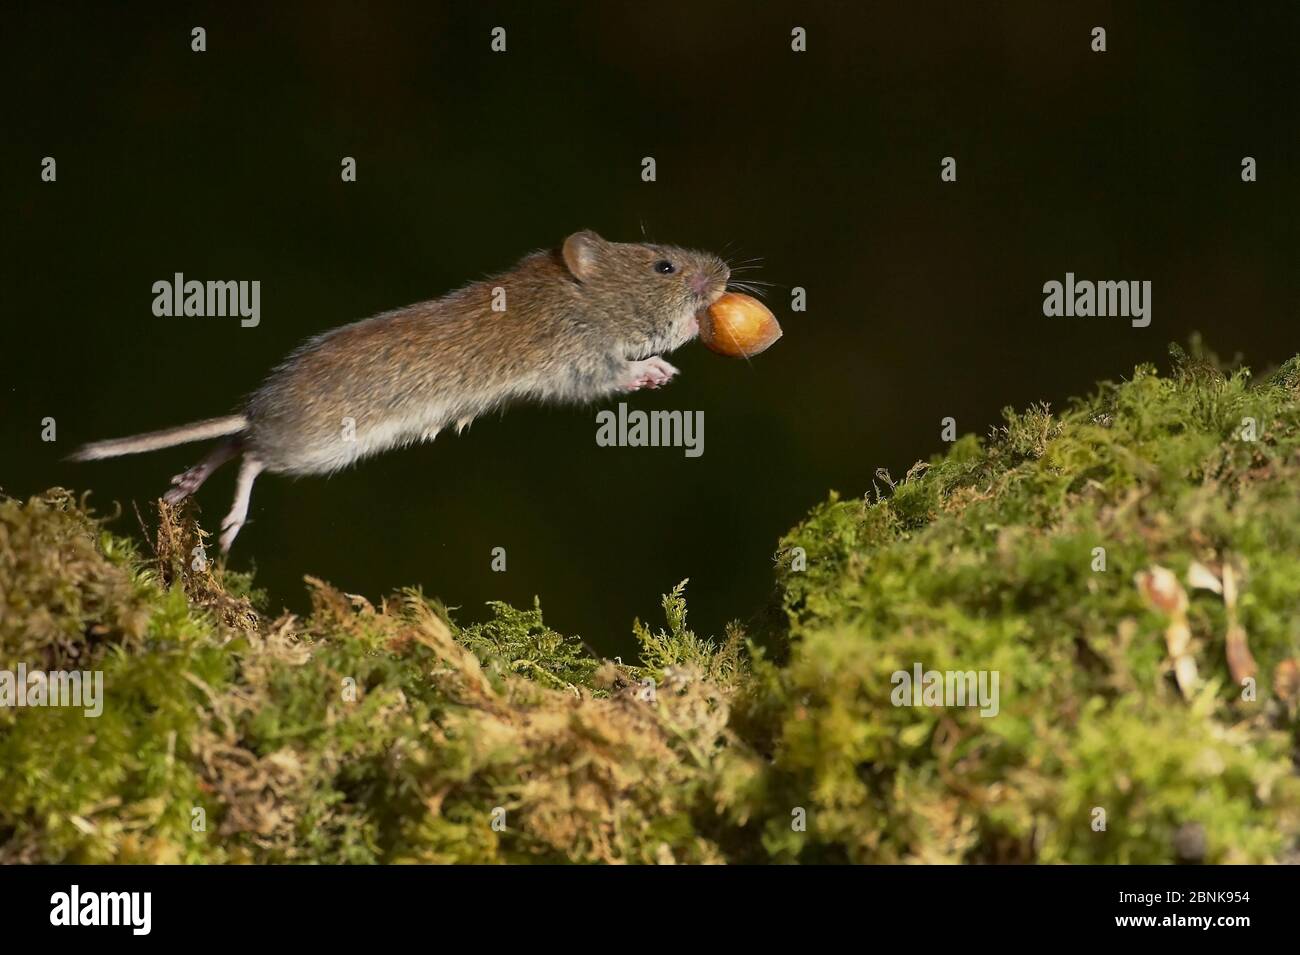 Bank vole (Clethrionomys glareolus) jumping over moss with hazel nut in mouth. Kilchrenan, Argyll and Bute, Scotland, UK. February. Stock Photo